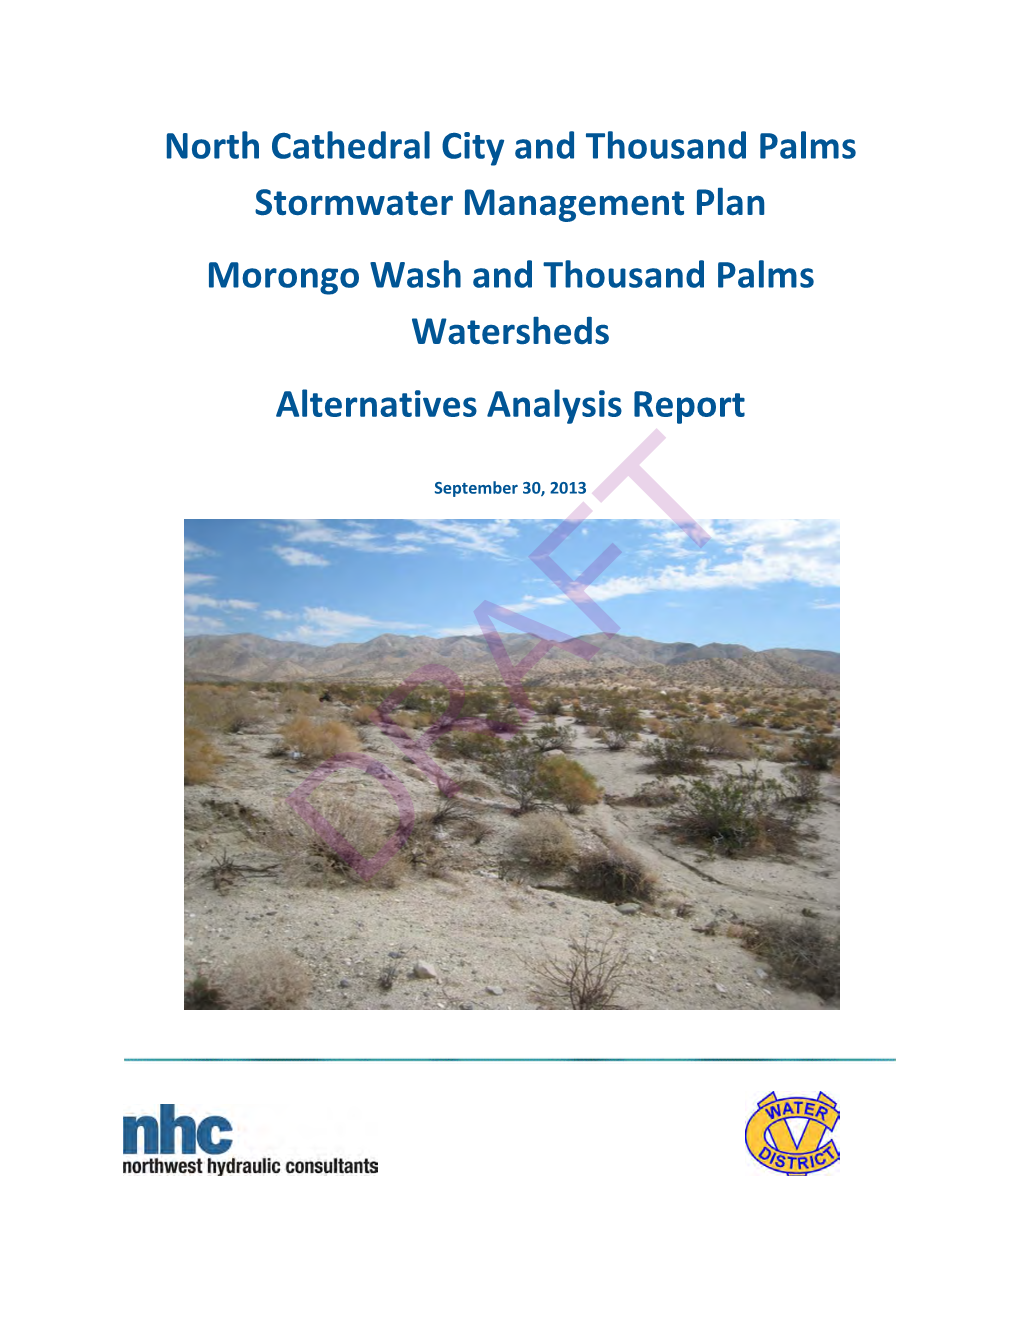 North Cathedral City and Thousand Palms Stormwater Management Plan Morongo Wash and Thousand Palms Watersheds Alternatives Analysis Report